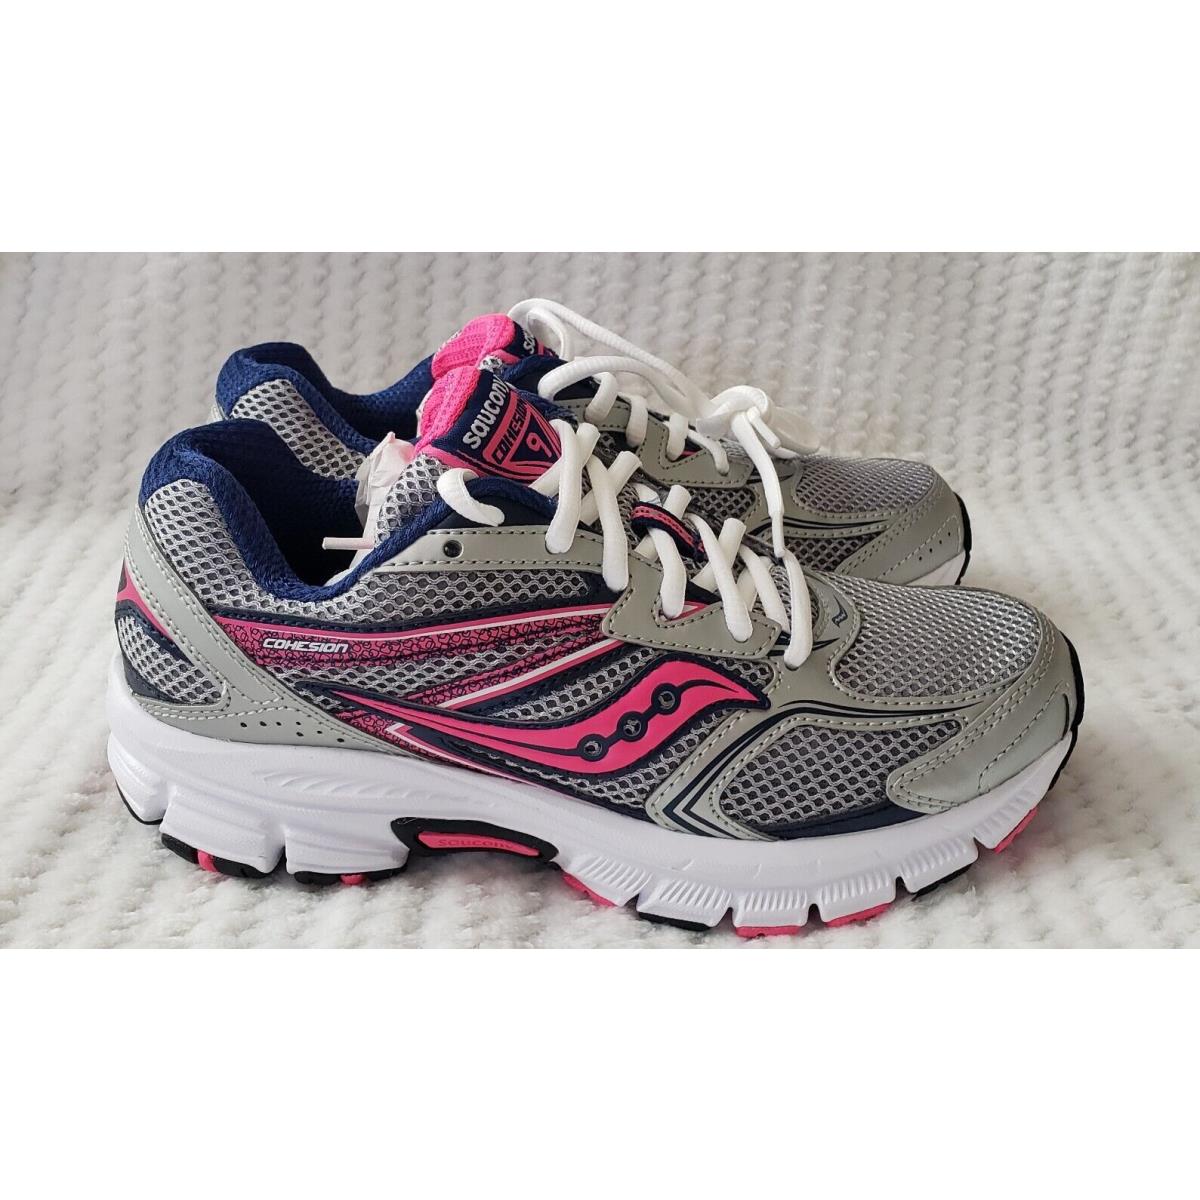 Saucony cohesion9 Woman s Running Shoe Size 6 s15262-35 Silver/navy/pink